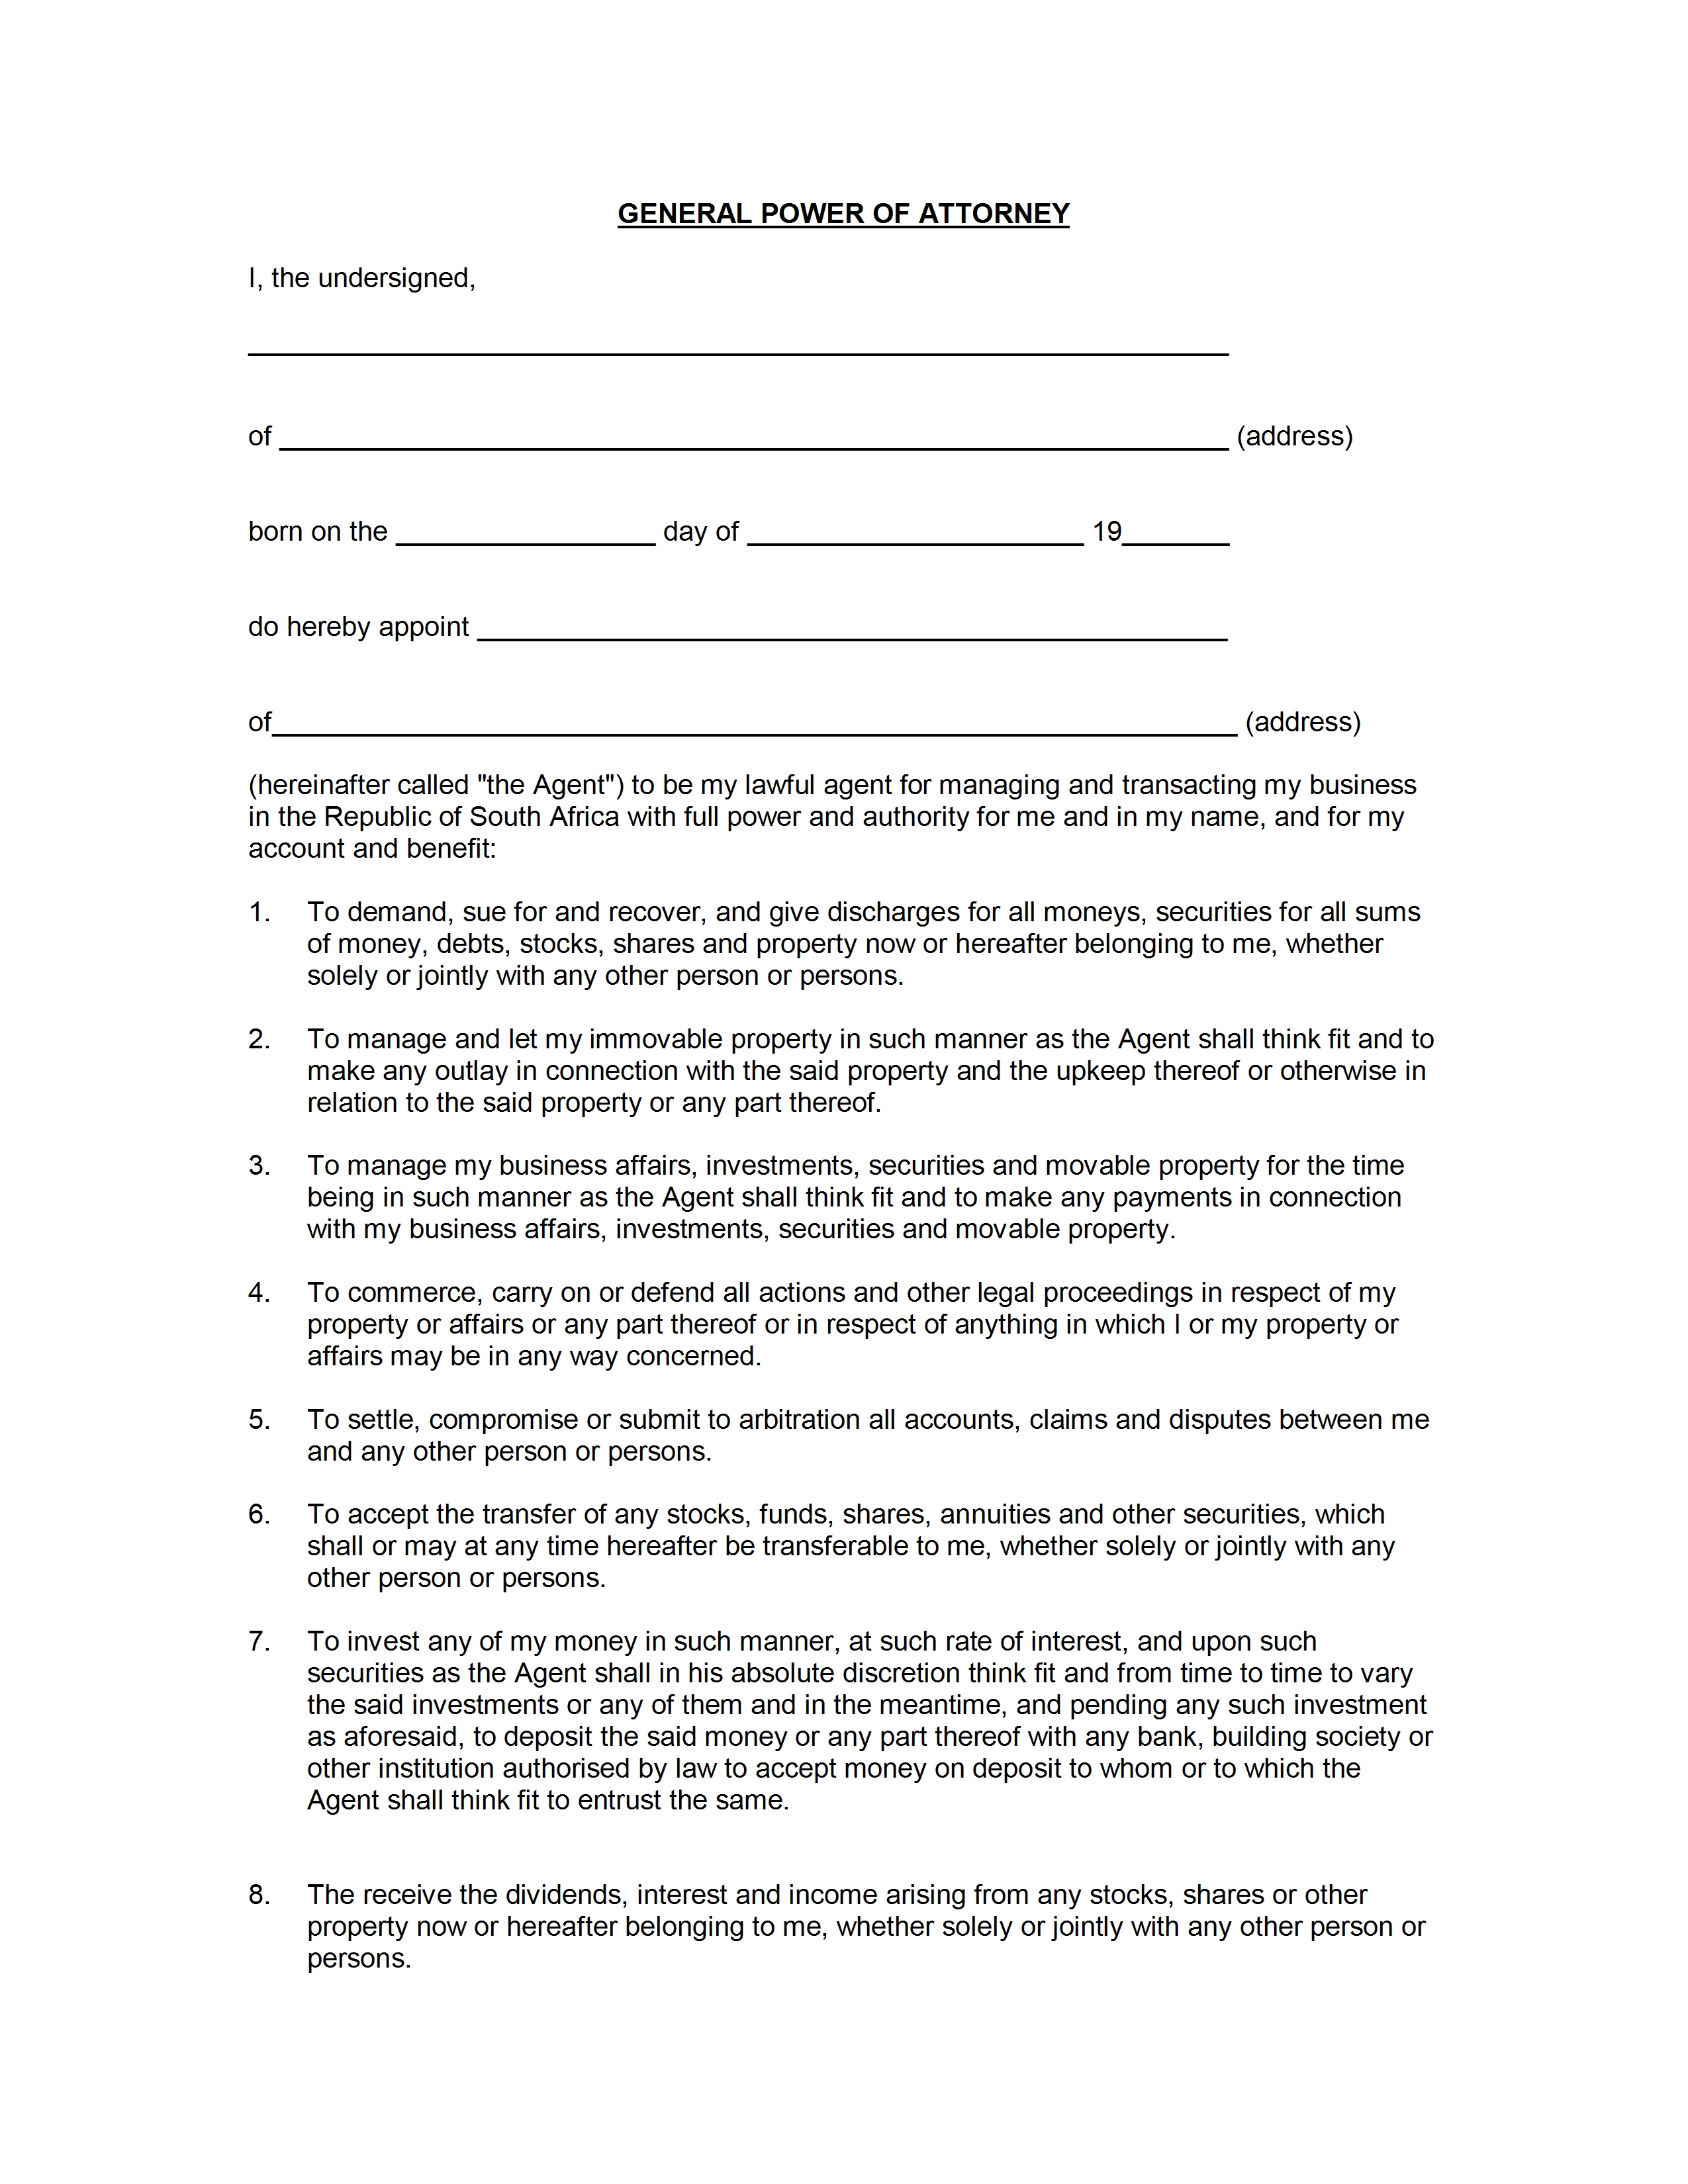 General Power of Attorney Letter Template